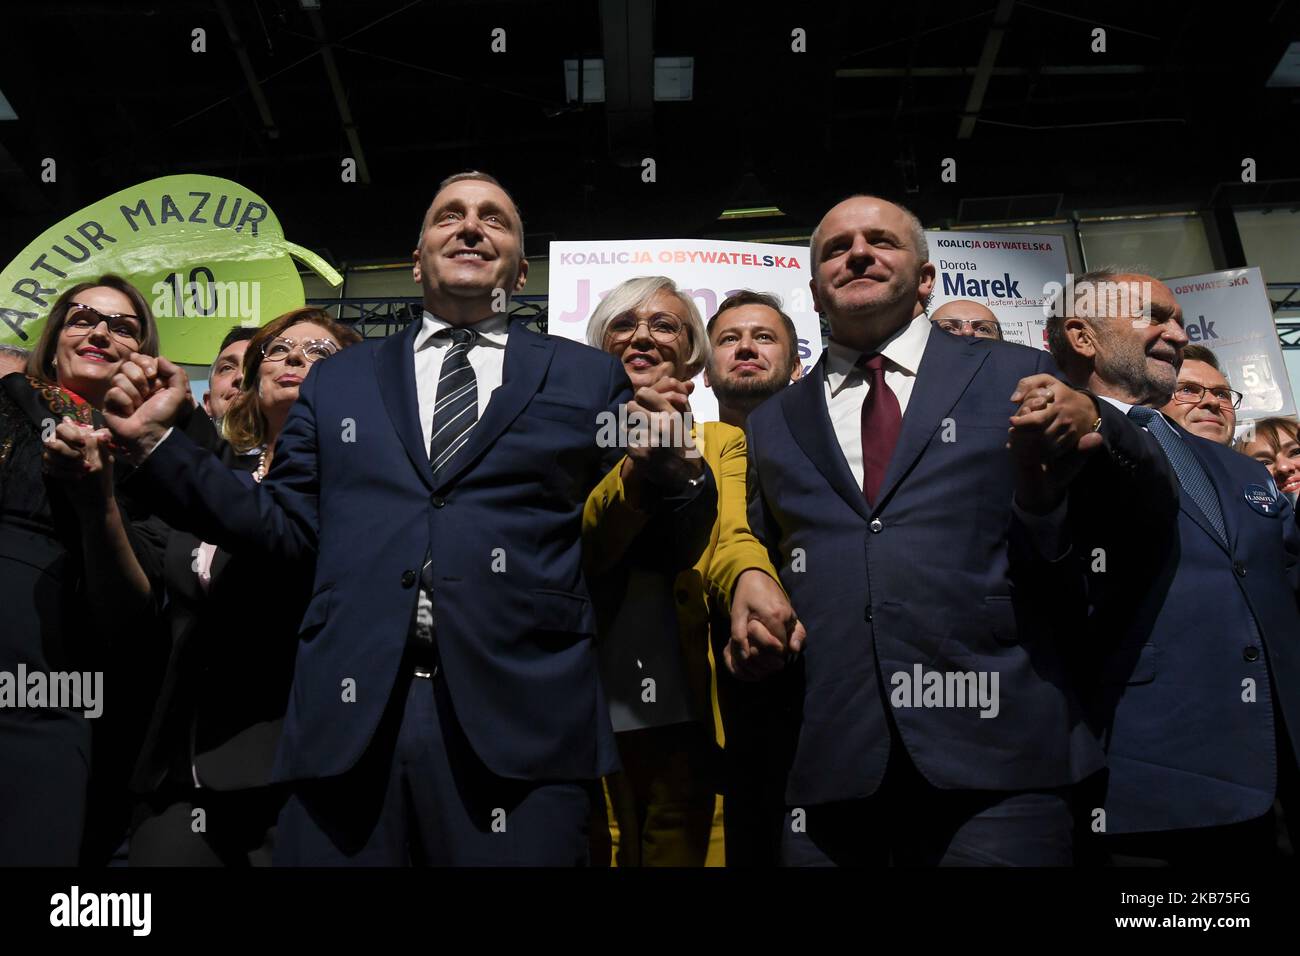 Malgorzata Kidawa-Blonska (2nd L), a candidate from the Civic Platform list and Deputy Marshal of the Polish Sejm, and Grzegorz Schetyna (Center L), Leader of Civic Platform, surrounded by a party members, during the Civic Coalition election campaign convention in Krakow, ahead of the 2019 Polish parliamentary election on Sunday, October 13, 2019. On Saturday, September 28, 2019, in Krakow, Poland. (Photo by Artur Widak/NurPhoto) Stock Photo